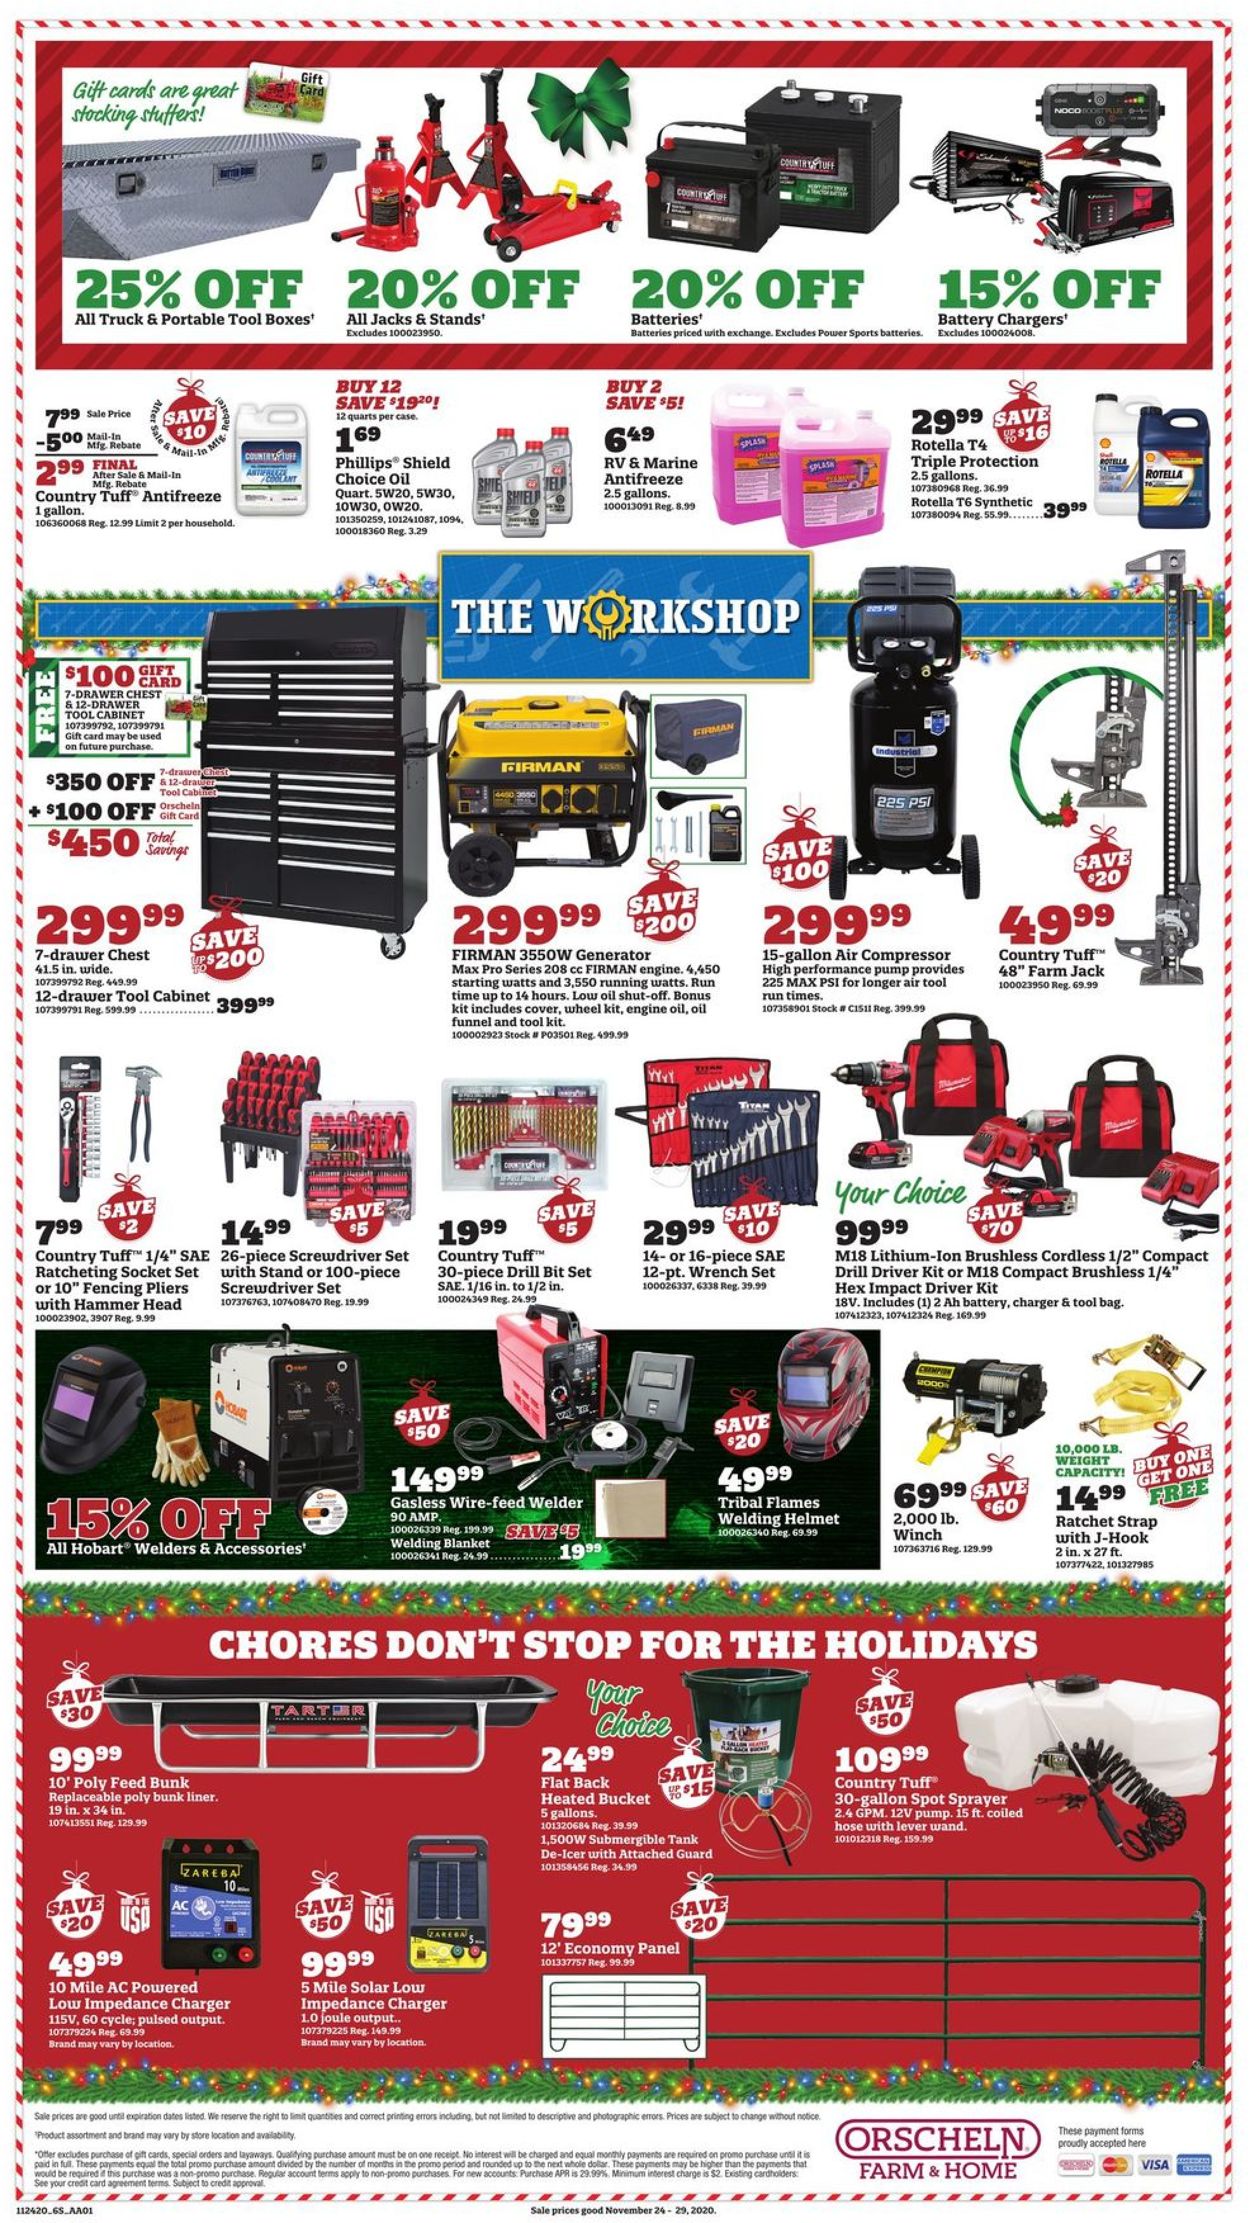 Orscheln Farm and Home - Black Friday Ad 2020 Weekly Ad Circular - valid 11/24-11/29/2020 (Page 8)